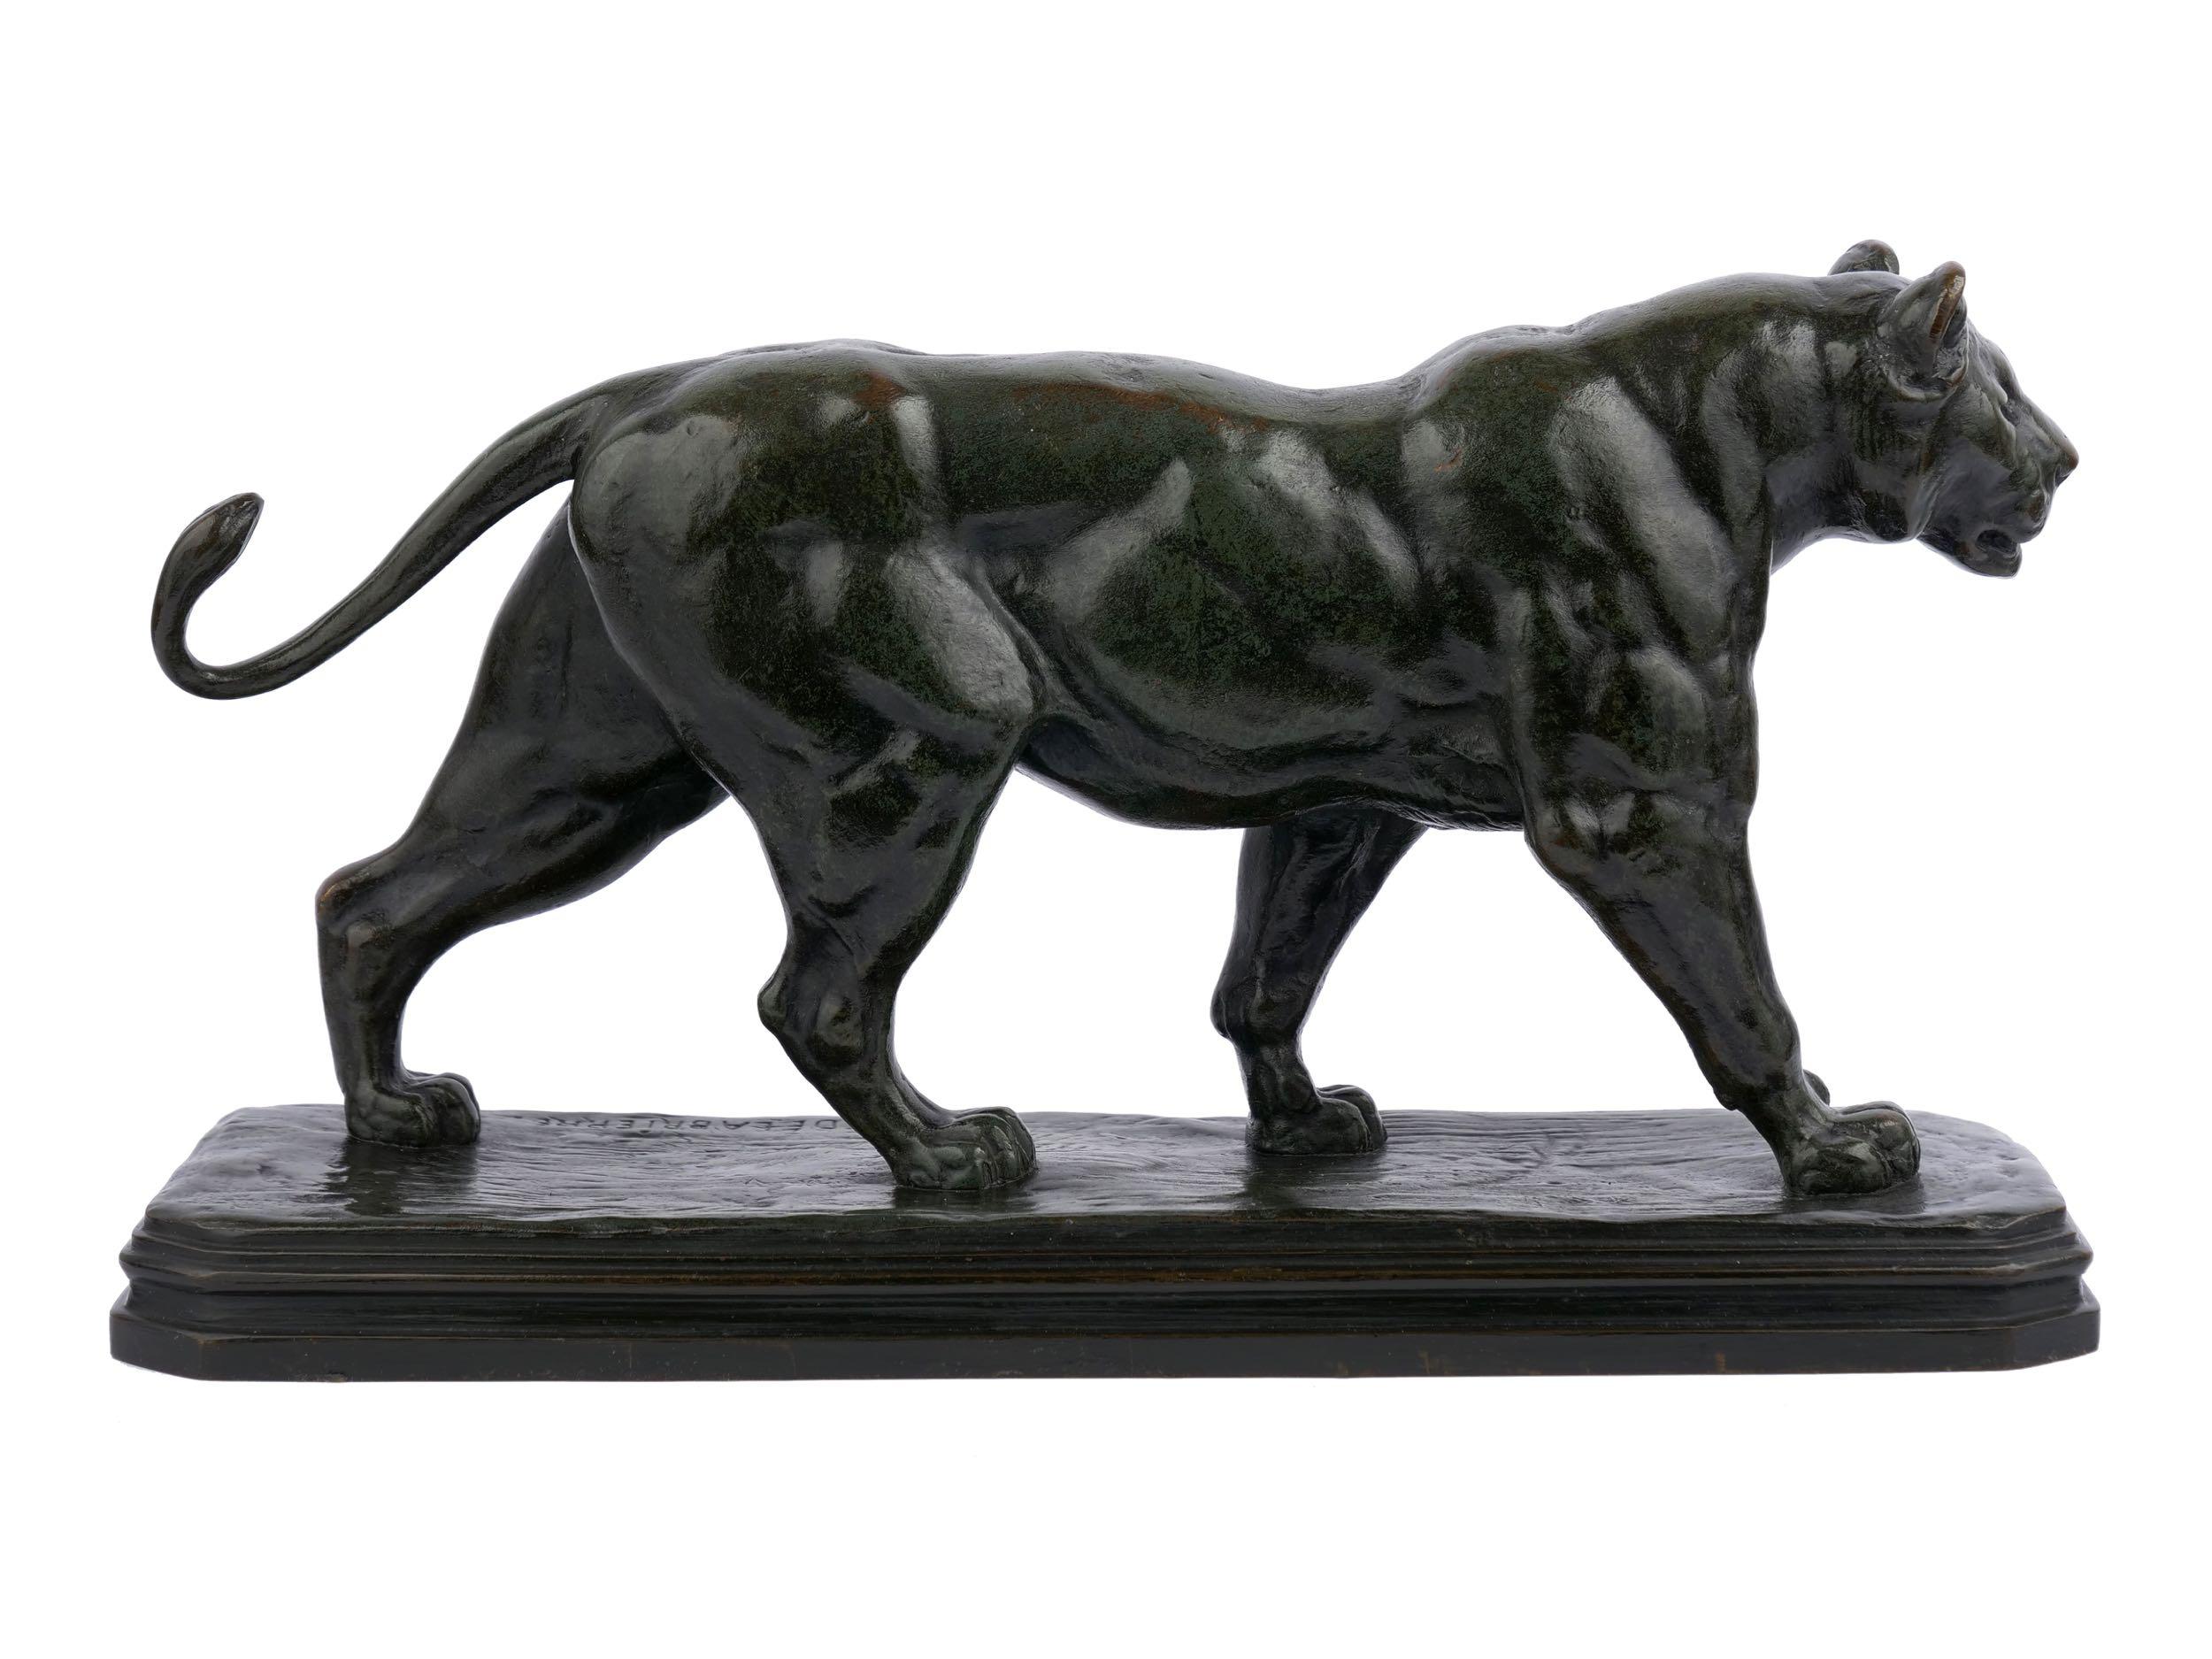 A fine model by Paul Edouard Delabrierre of a striding lioness, though perhaps being the Royal Bengal tiger he exhibited at the 1857 Salon or the Bengal Tiger of 1864, it presently tends to be catalogued as 